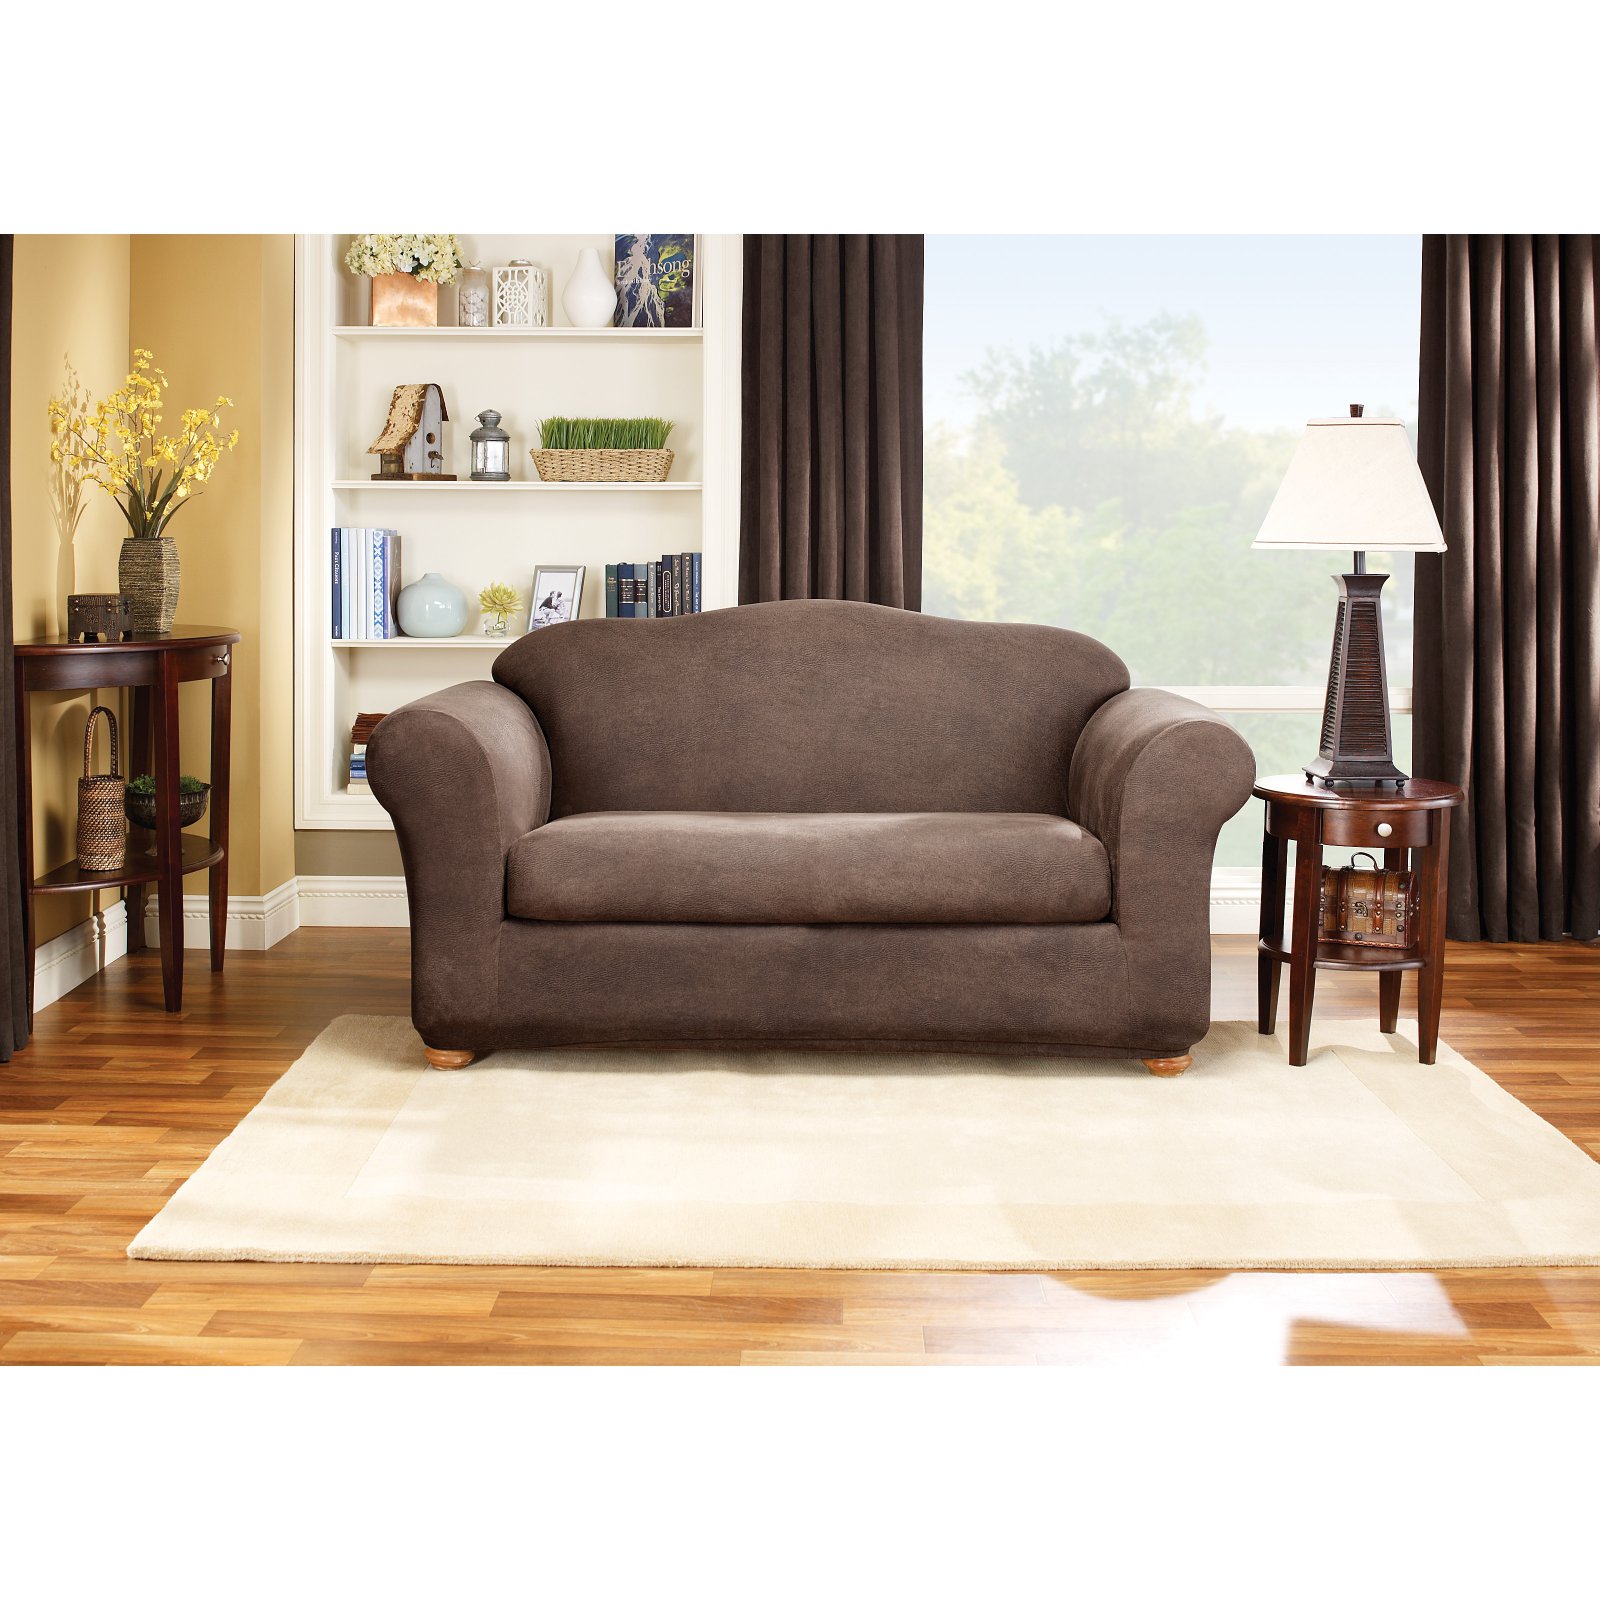 Sure Fit Stretch Leather 2-piece Sofa Slipcover, Brown - image 1 of 3